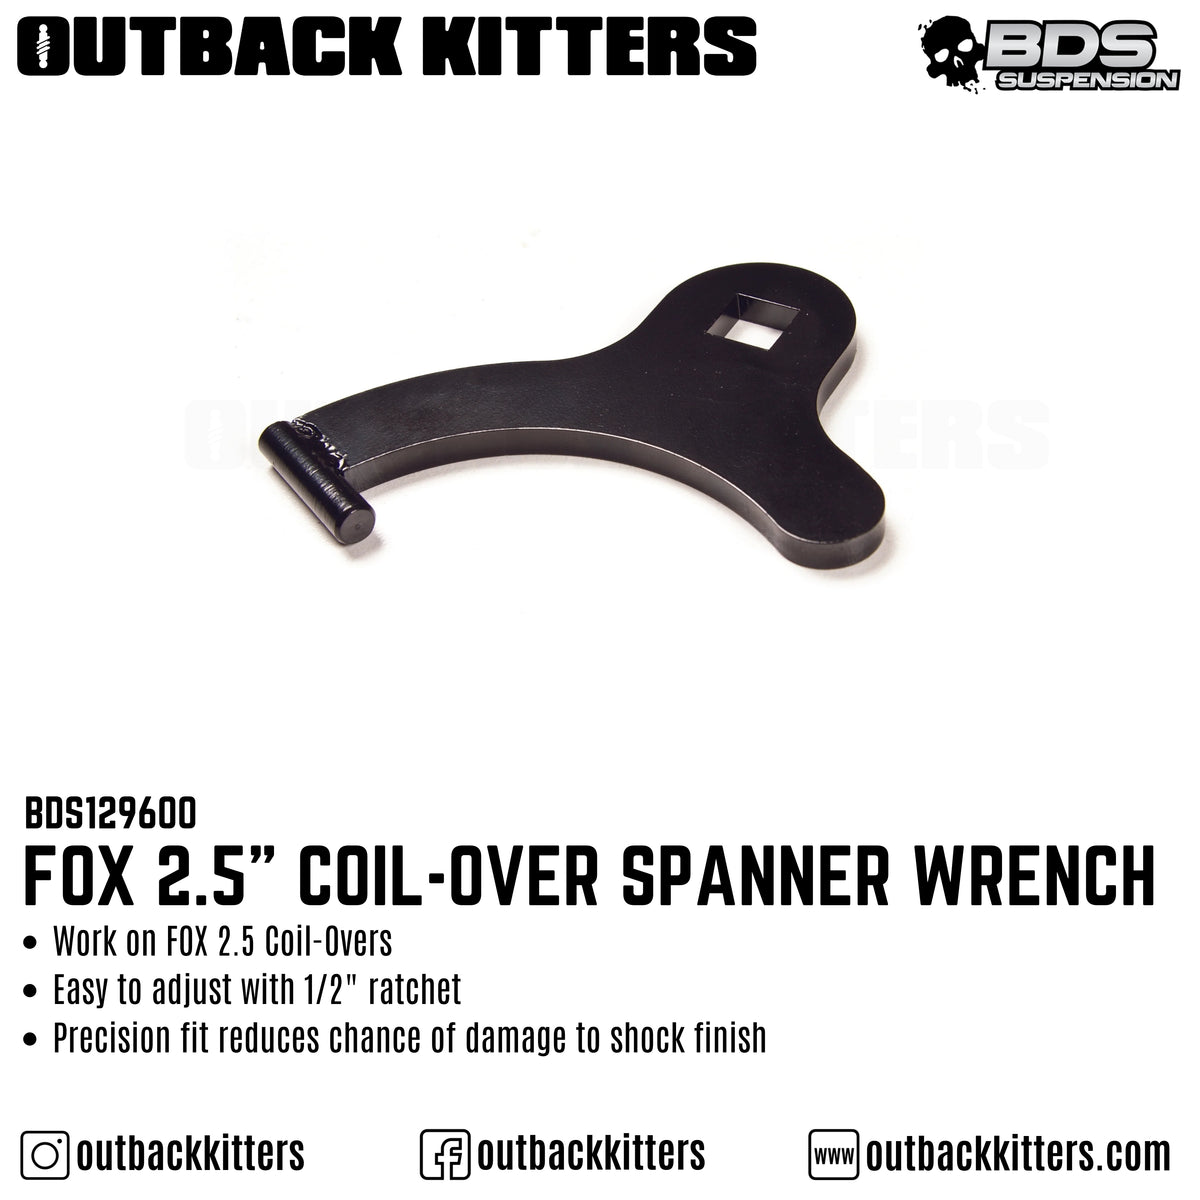 Fox 2.5" Coil-Over Spanner Wrench - Outback Kitters